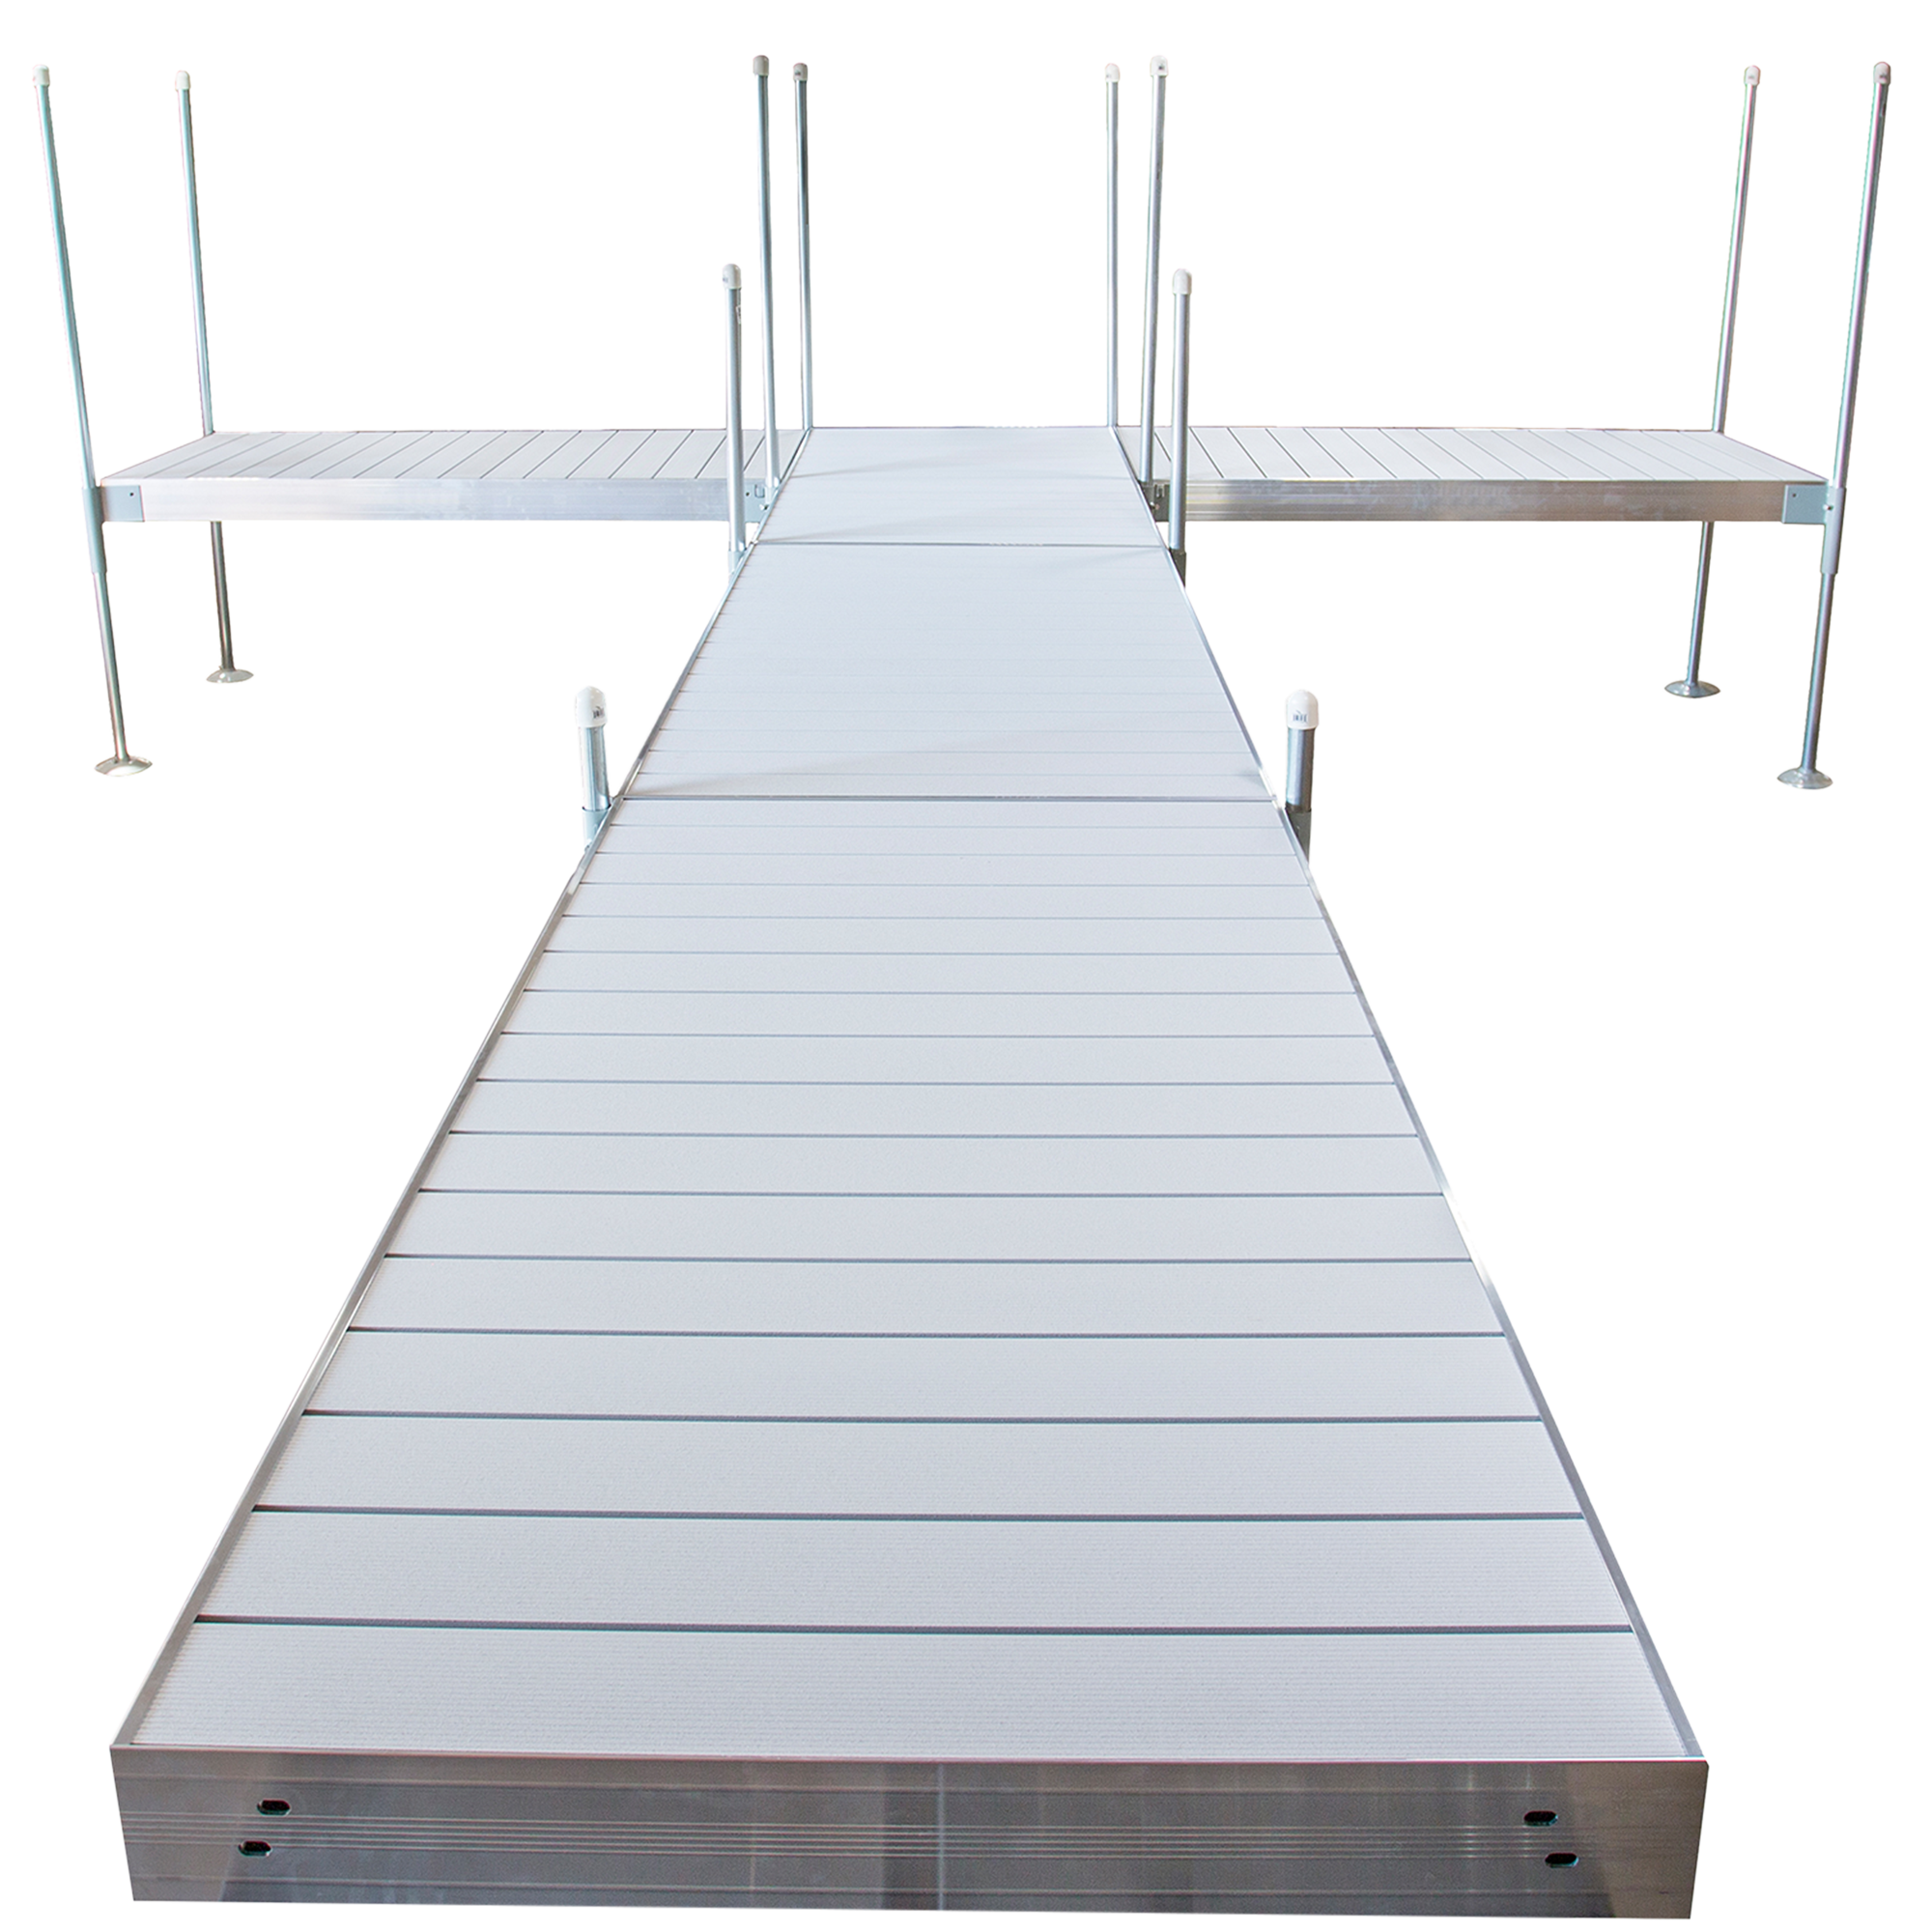 24’ T-Shaped Boat Dock System with Aluminum Frame and Aluminum Decking